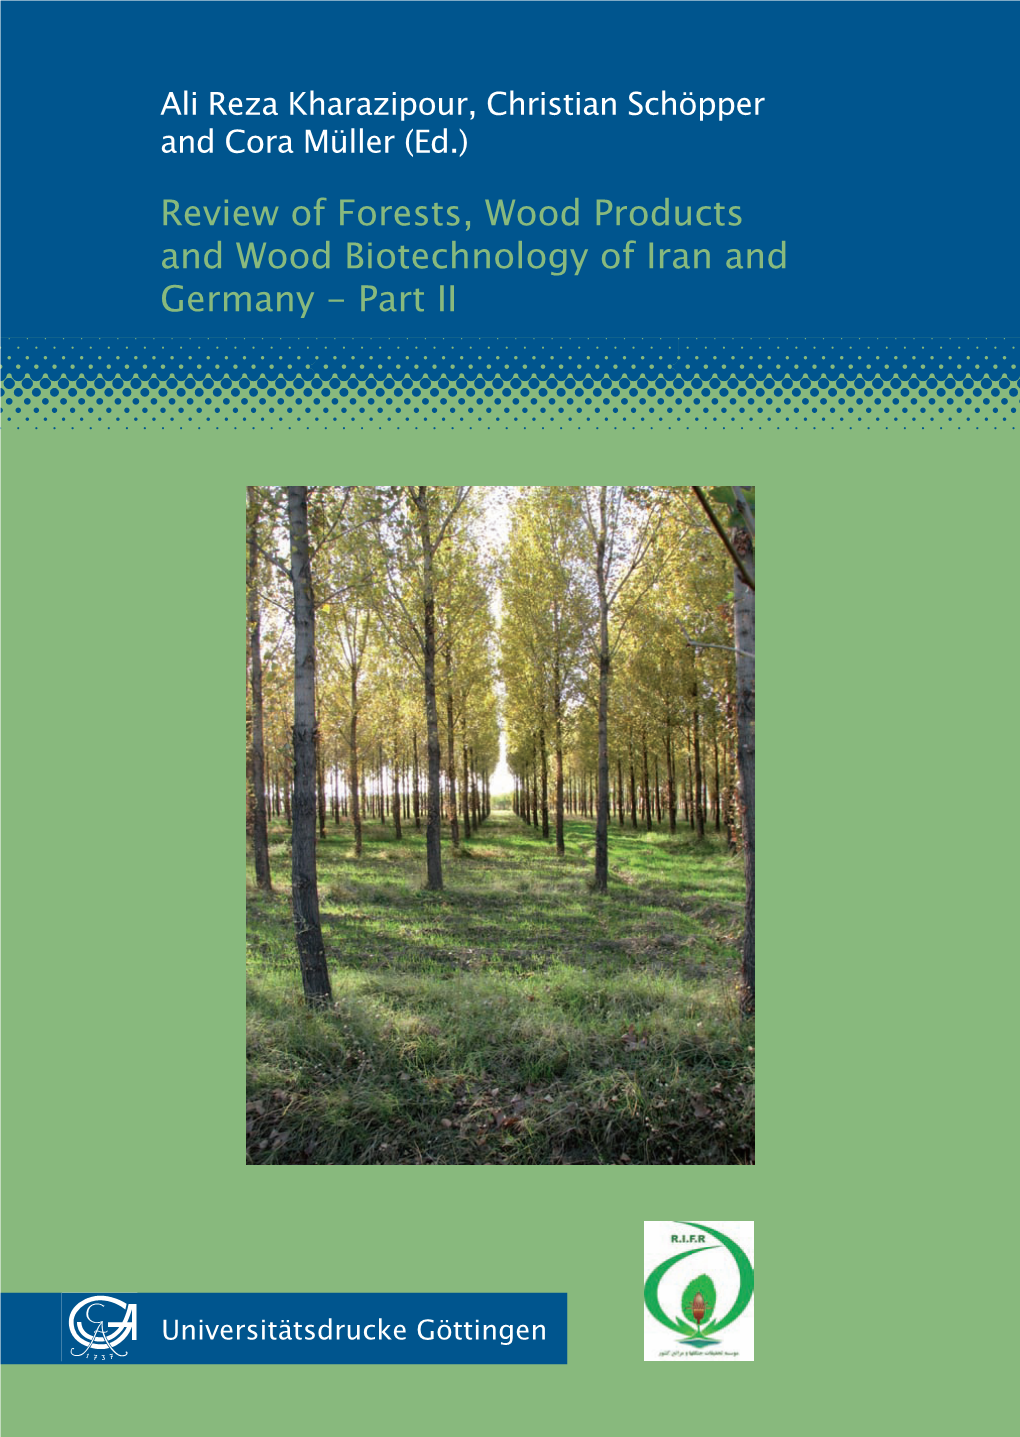 Review of Forests, Wood Products and Wood Biotechnology of Iran and Germany - Part II